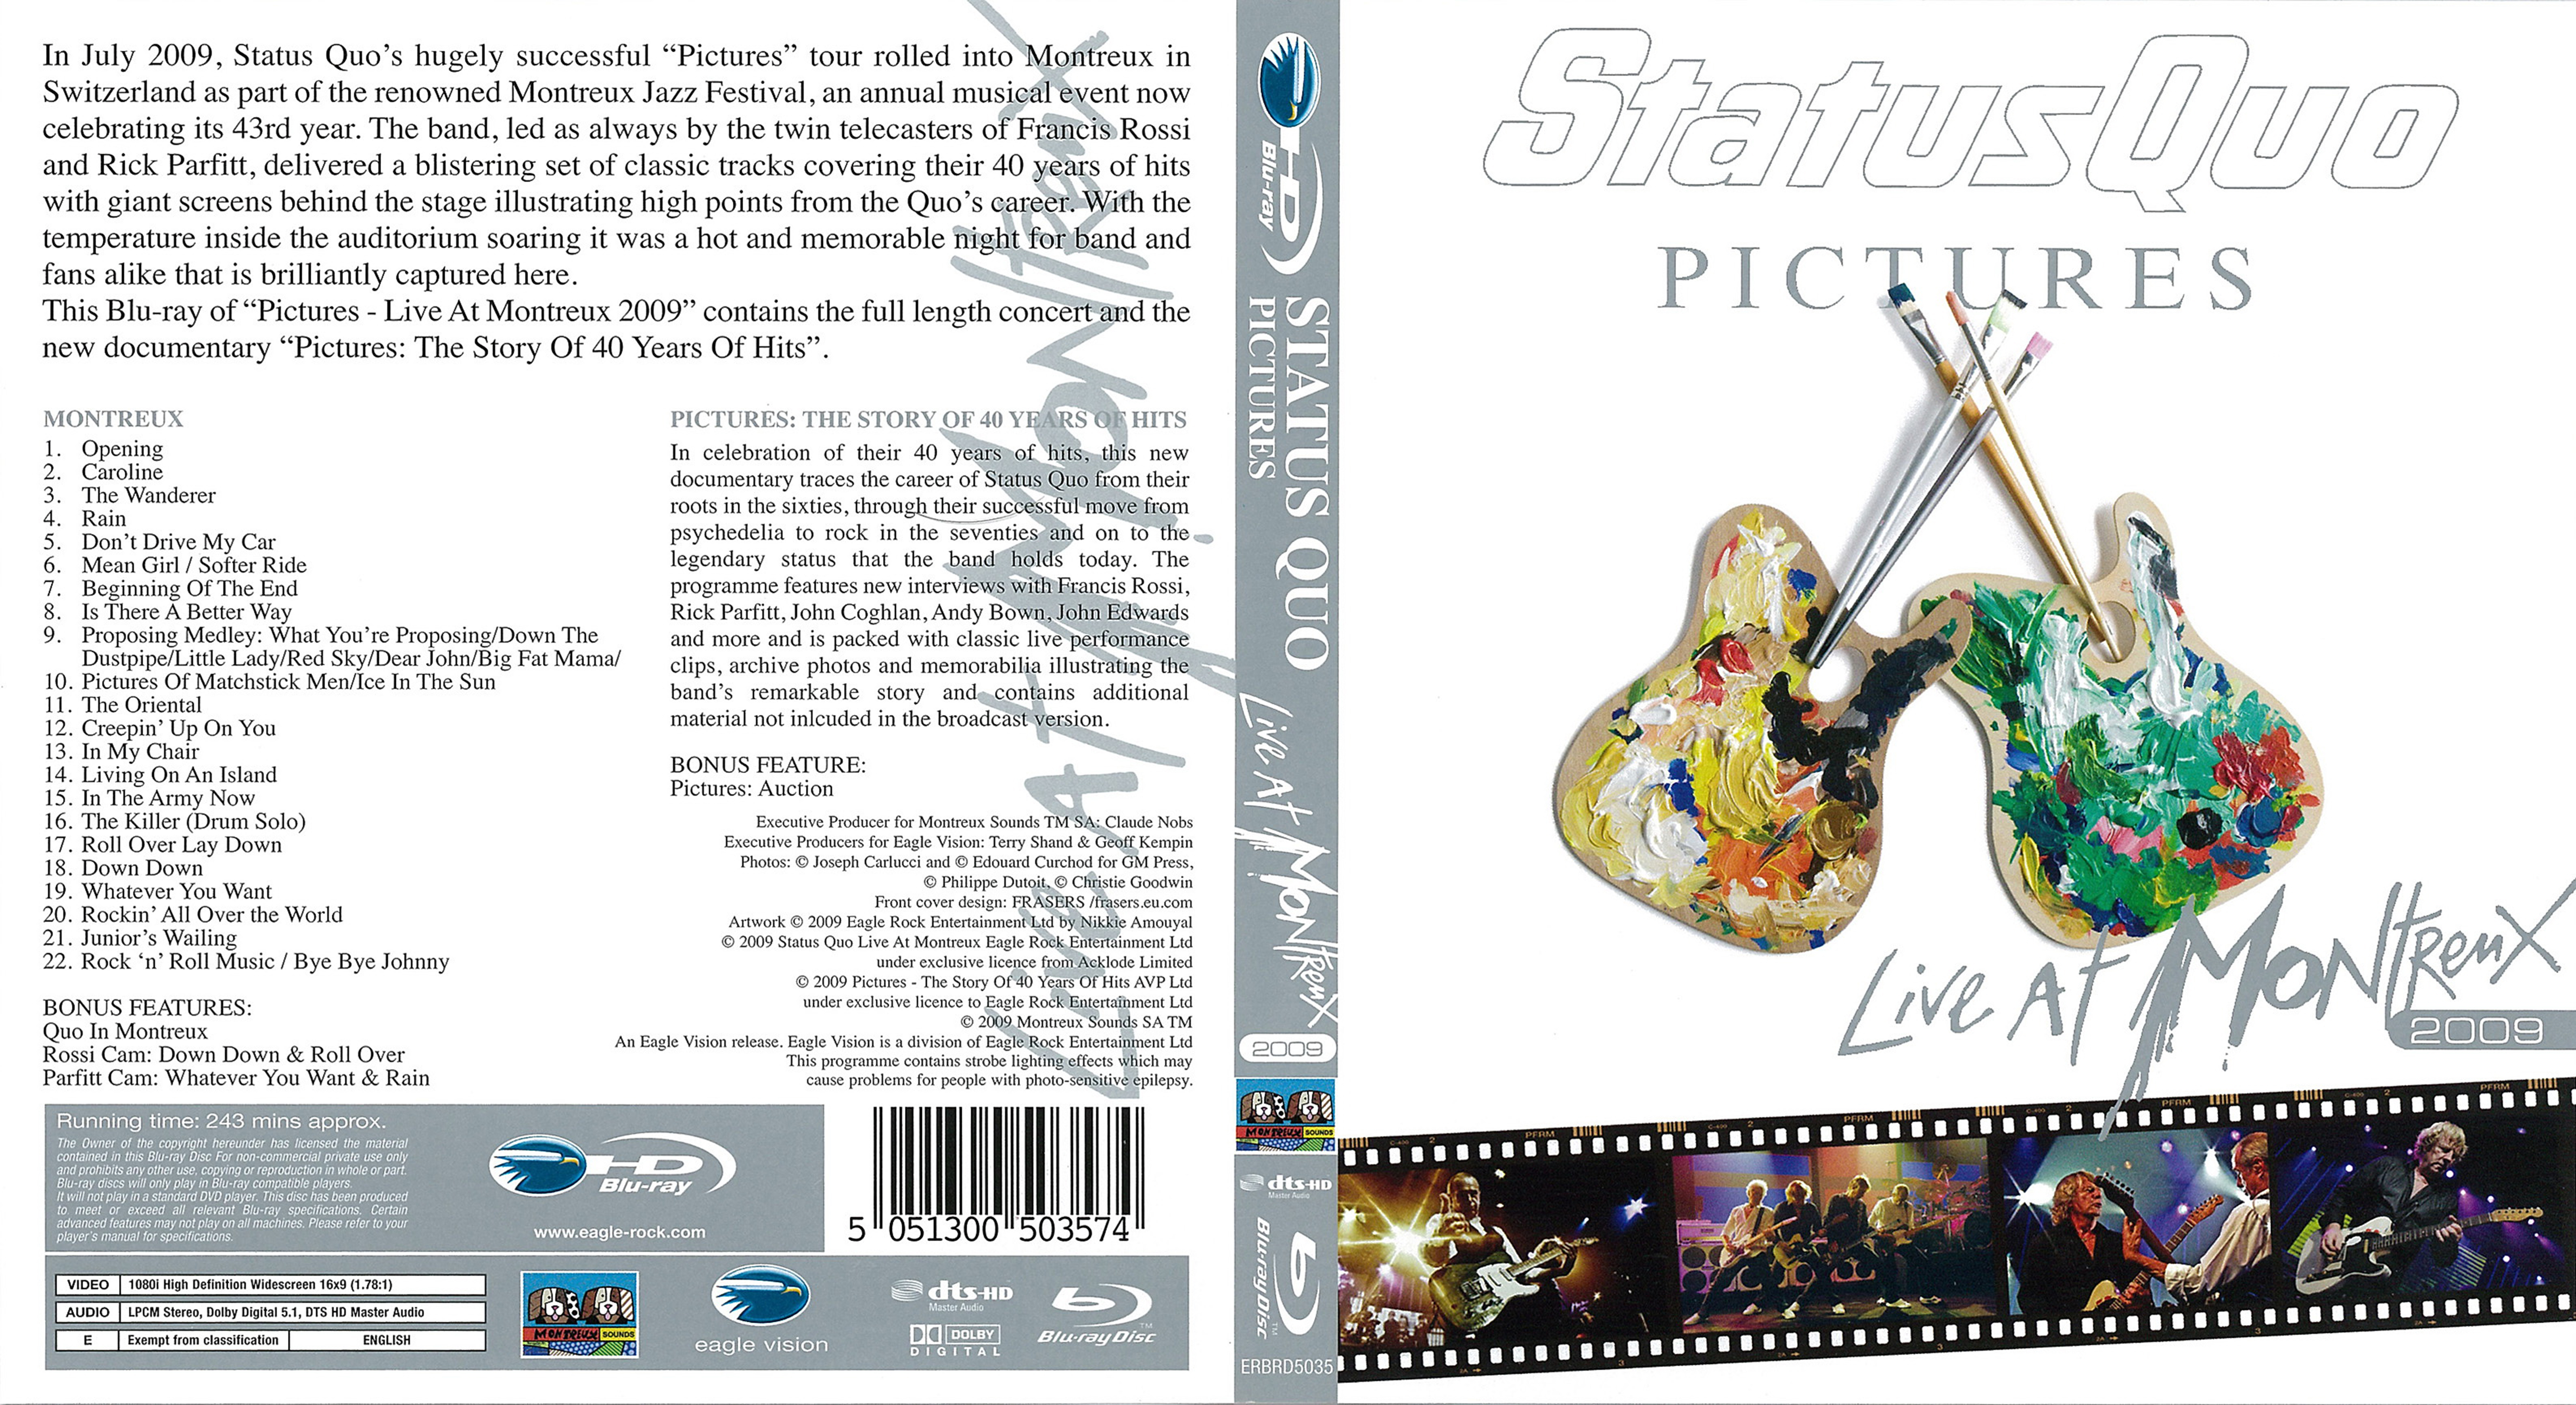 Status Quo - Pictures- Live At Montreux (2009).jpg